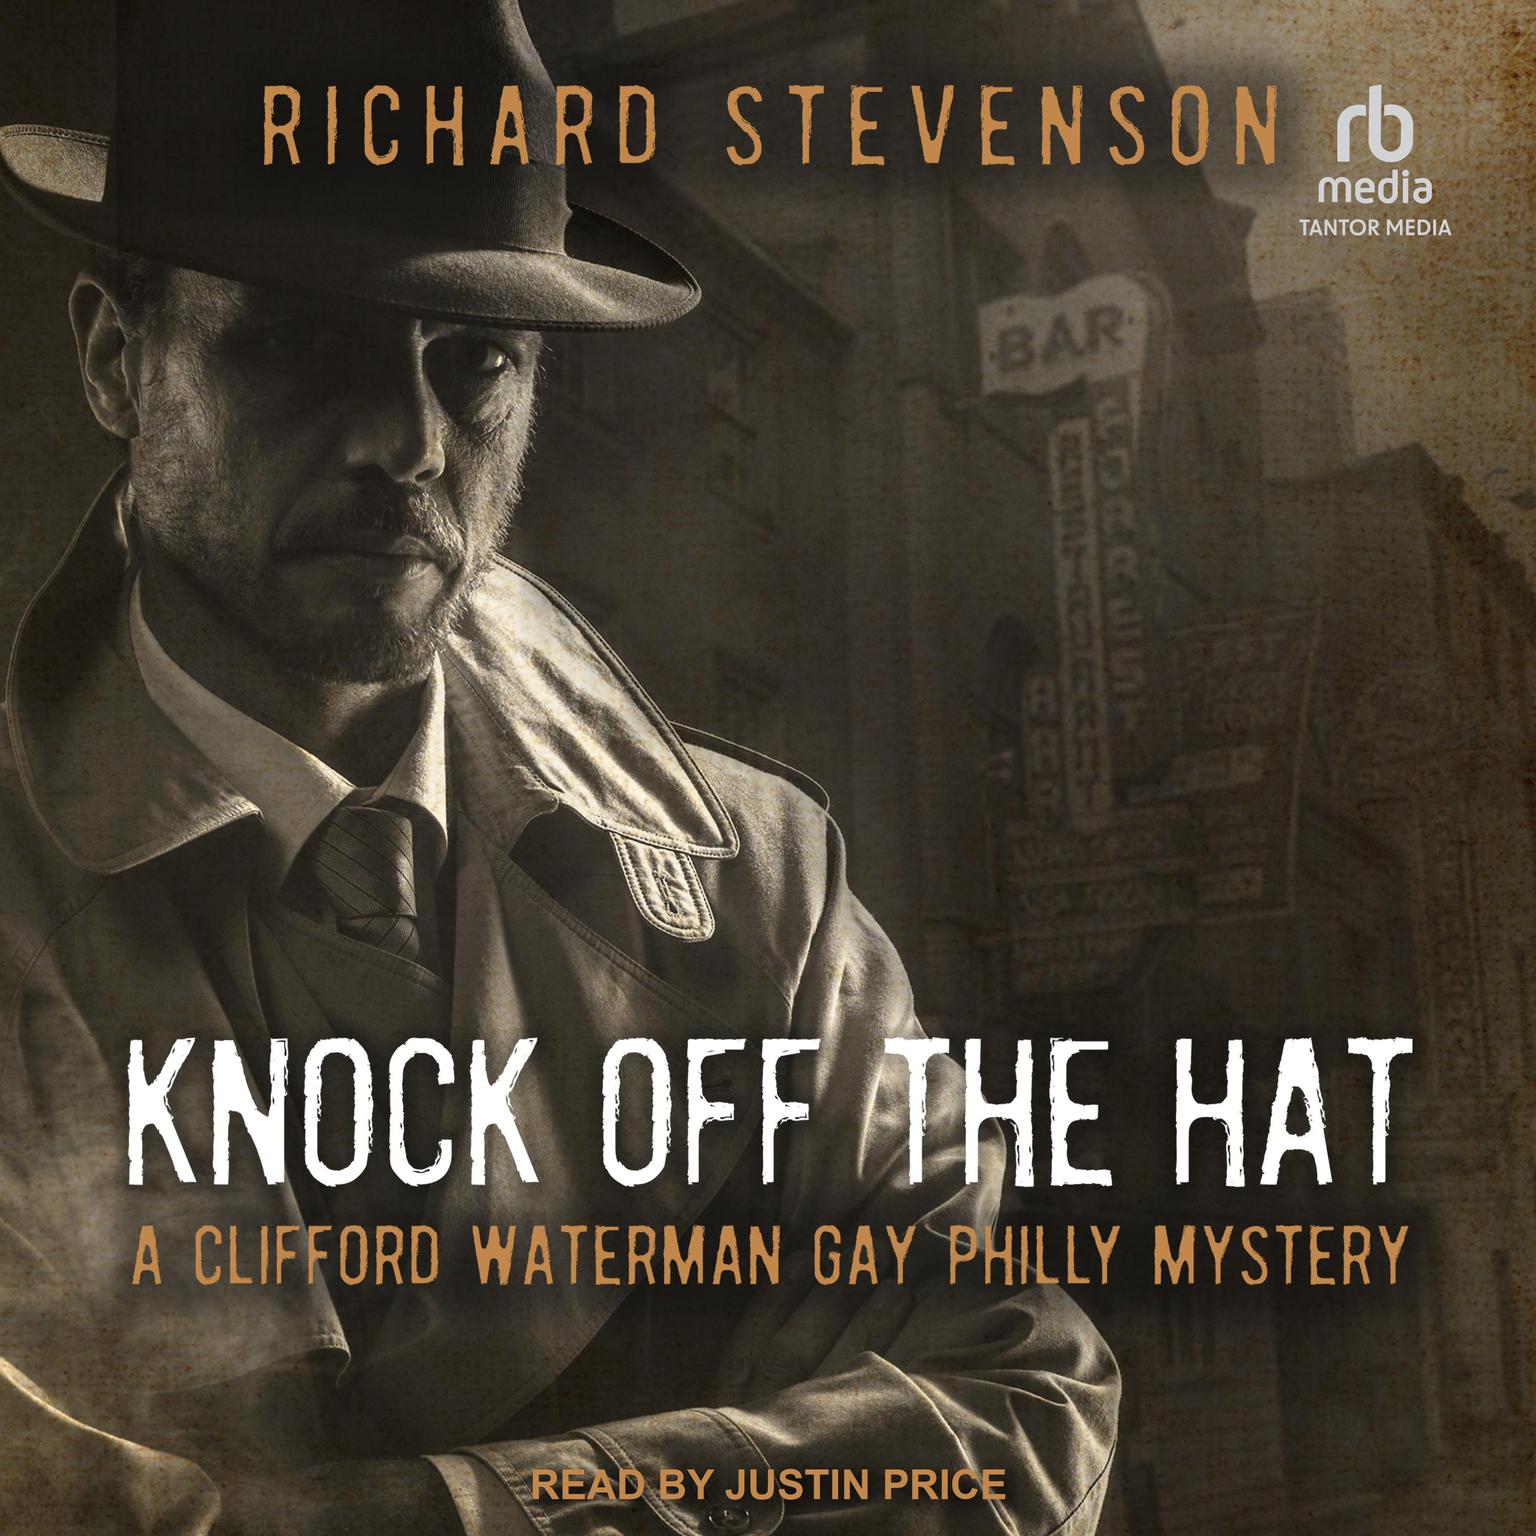 Knock Off the Hat: A Clifford Waterman Gay Philly Mystery Audiobook, by Richard Stevenson